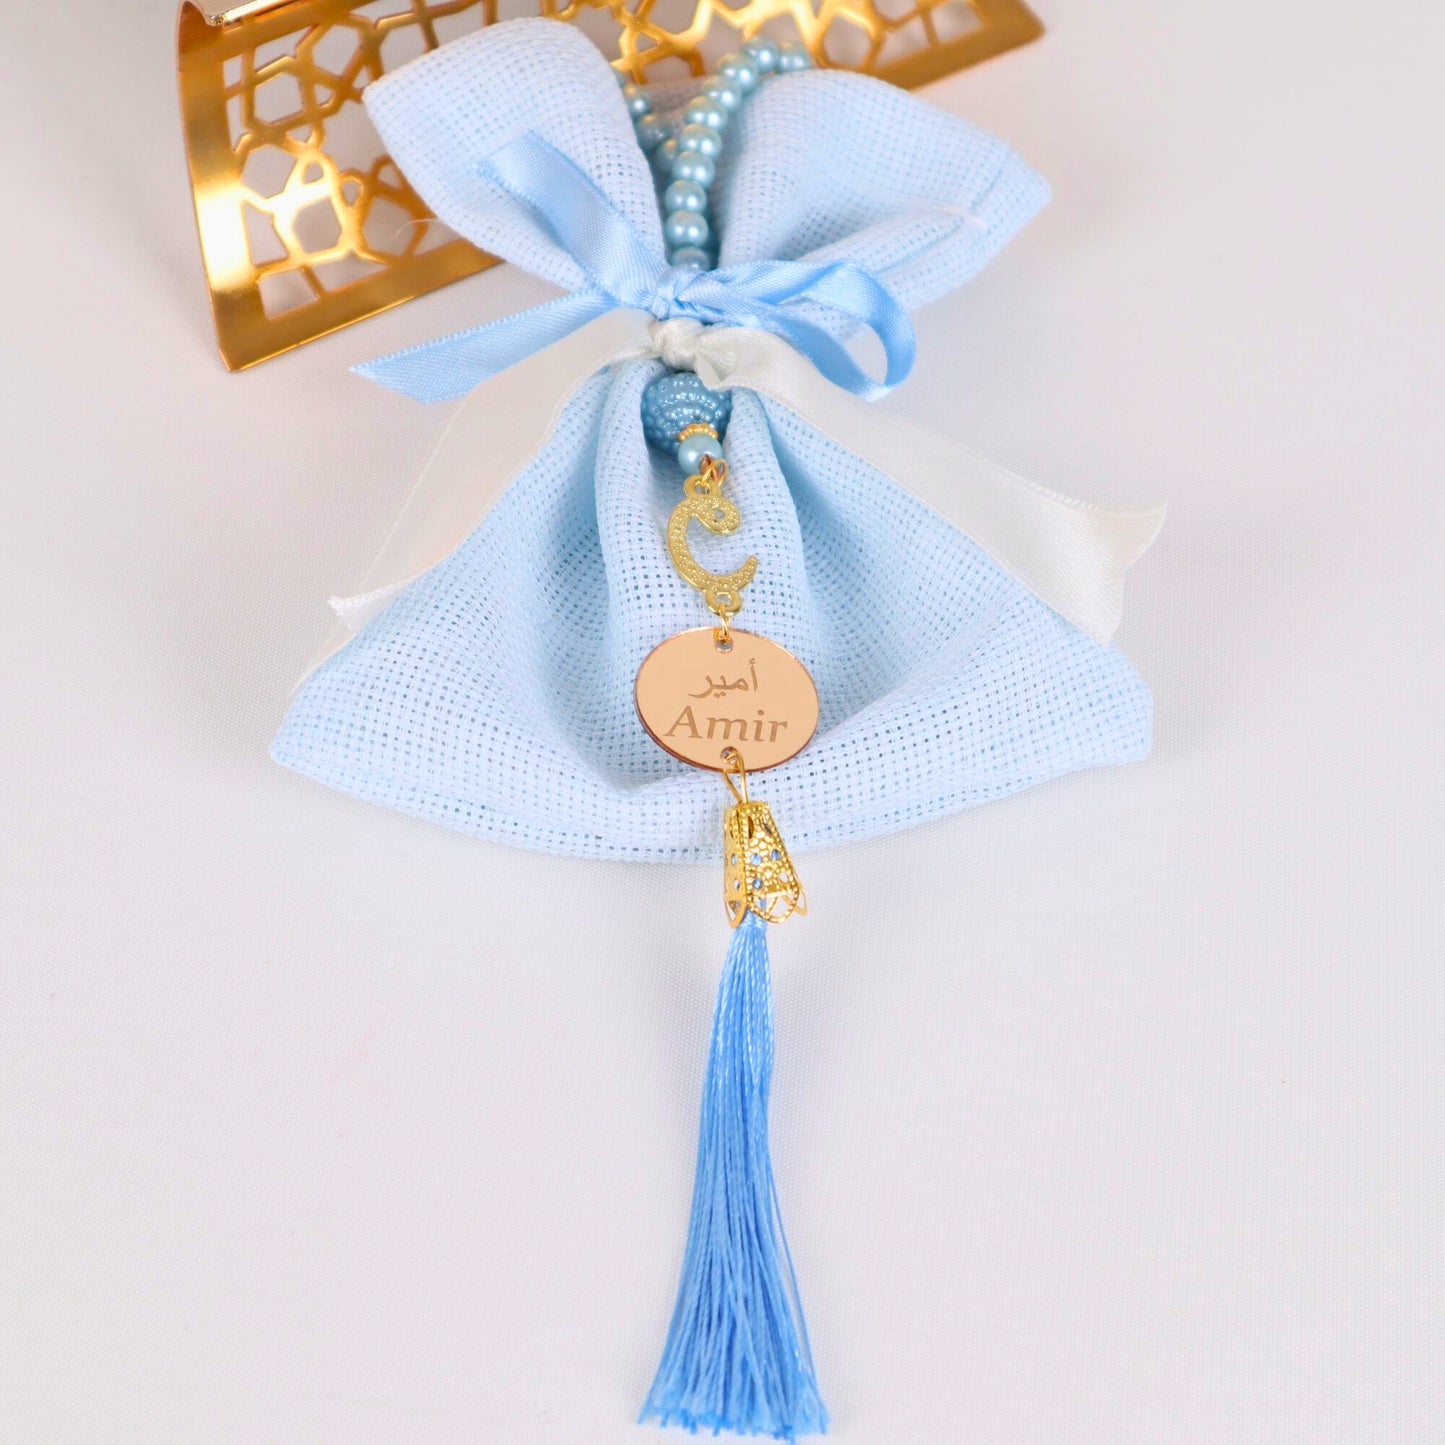 Personalized Pearl Prayer Beads in Colorful Pouch Favors for Guests